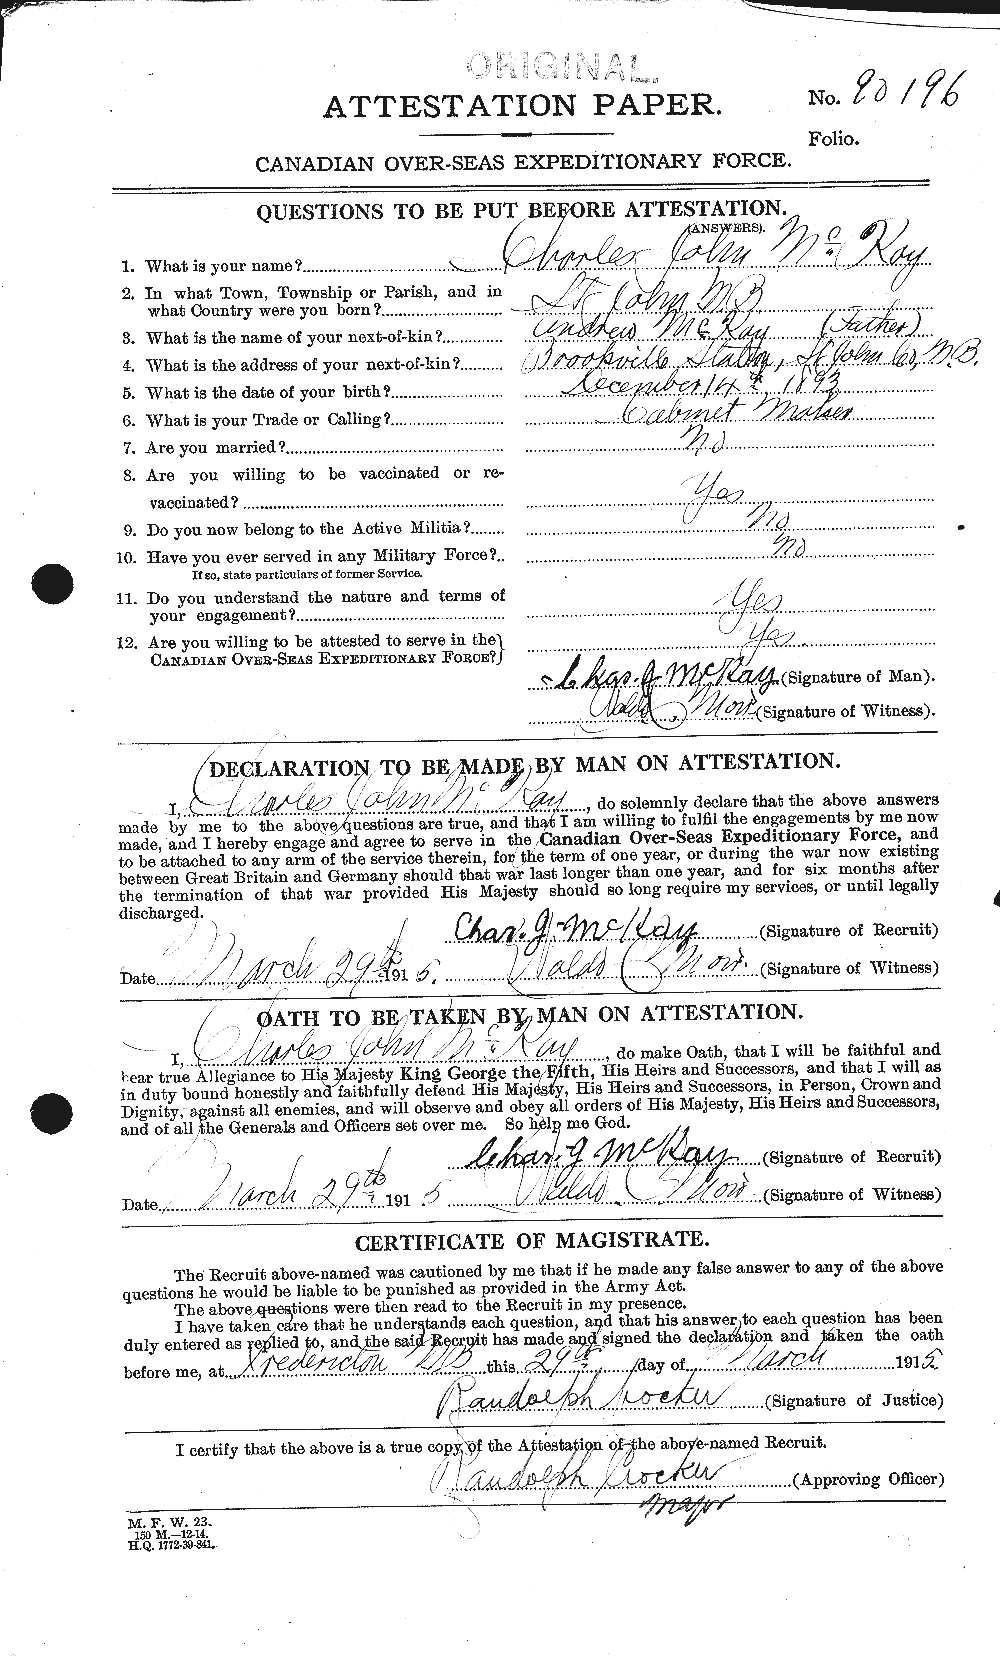 Personnel Records of the First World War - CEF 531070a